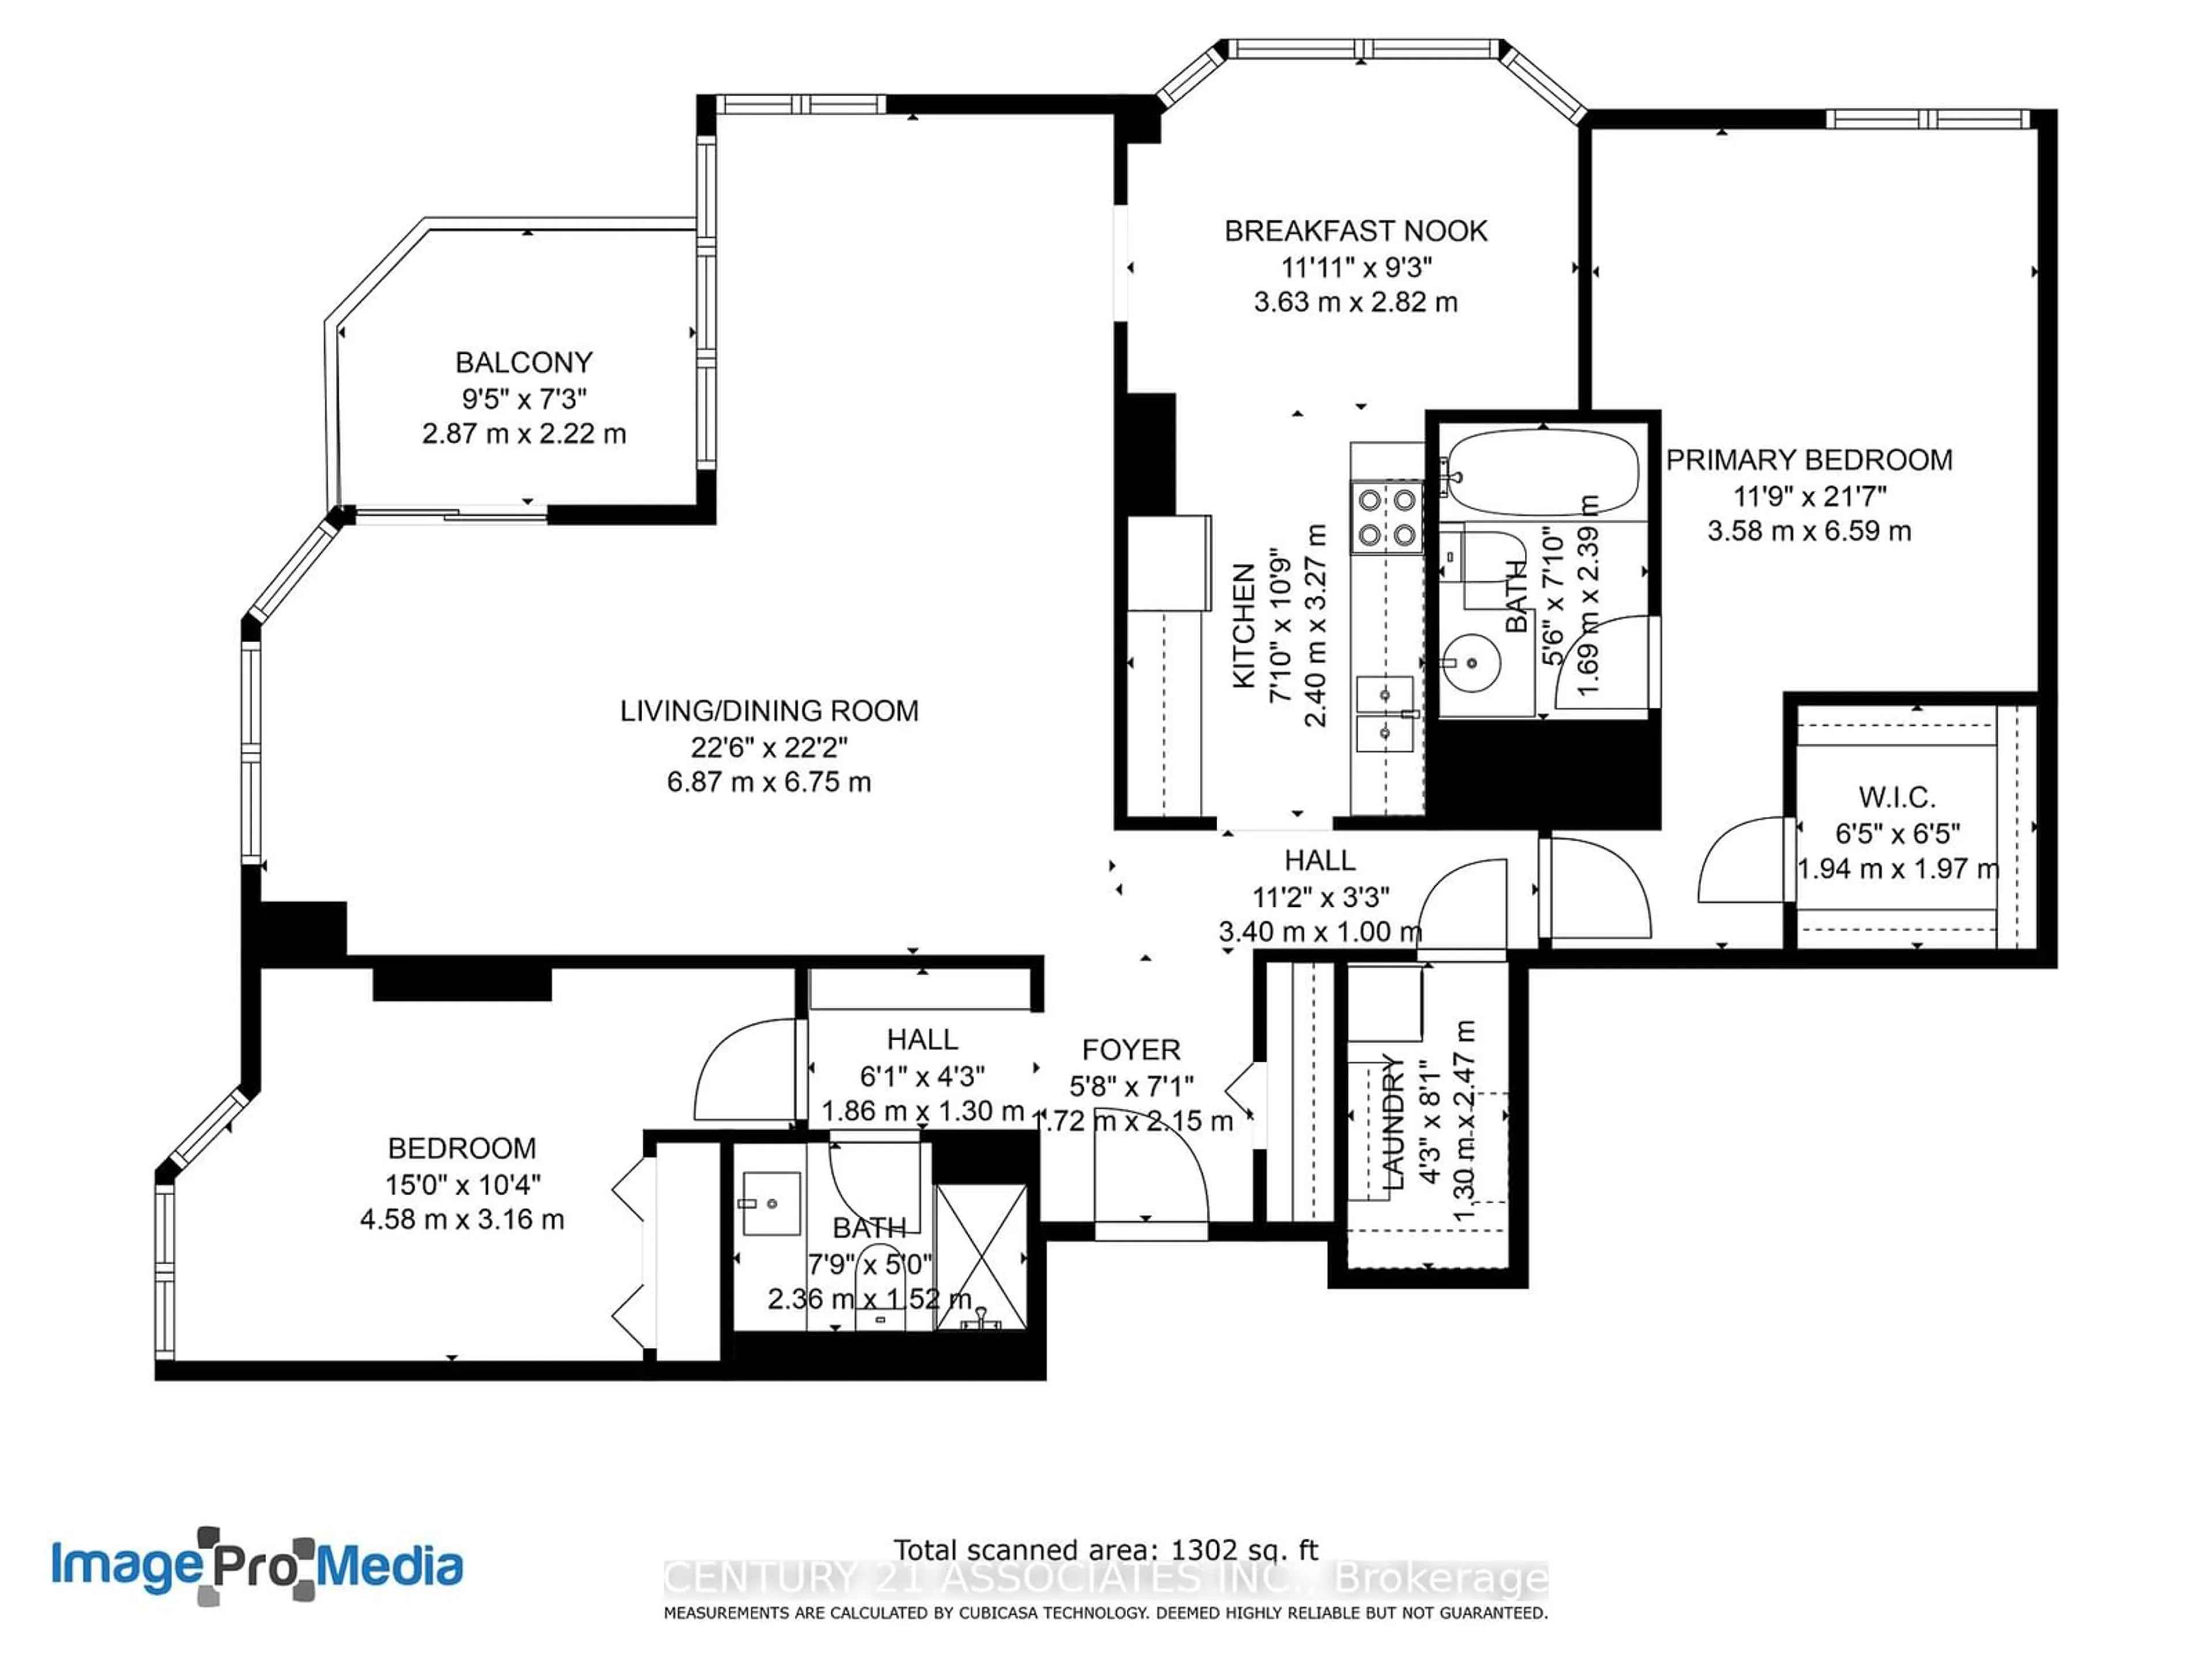 Floor plan for 1111 Bough Beeches Blvd #502, Mississauga Ontario L4W 4N1